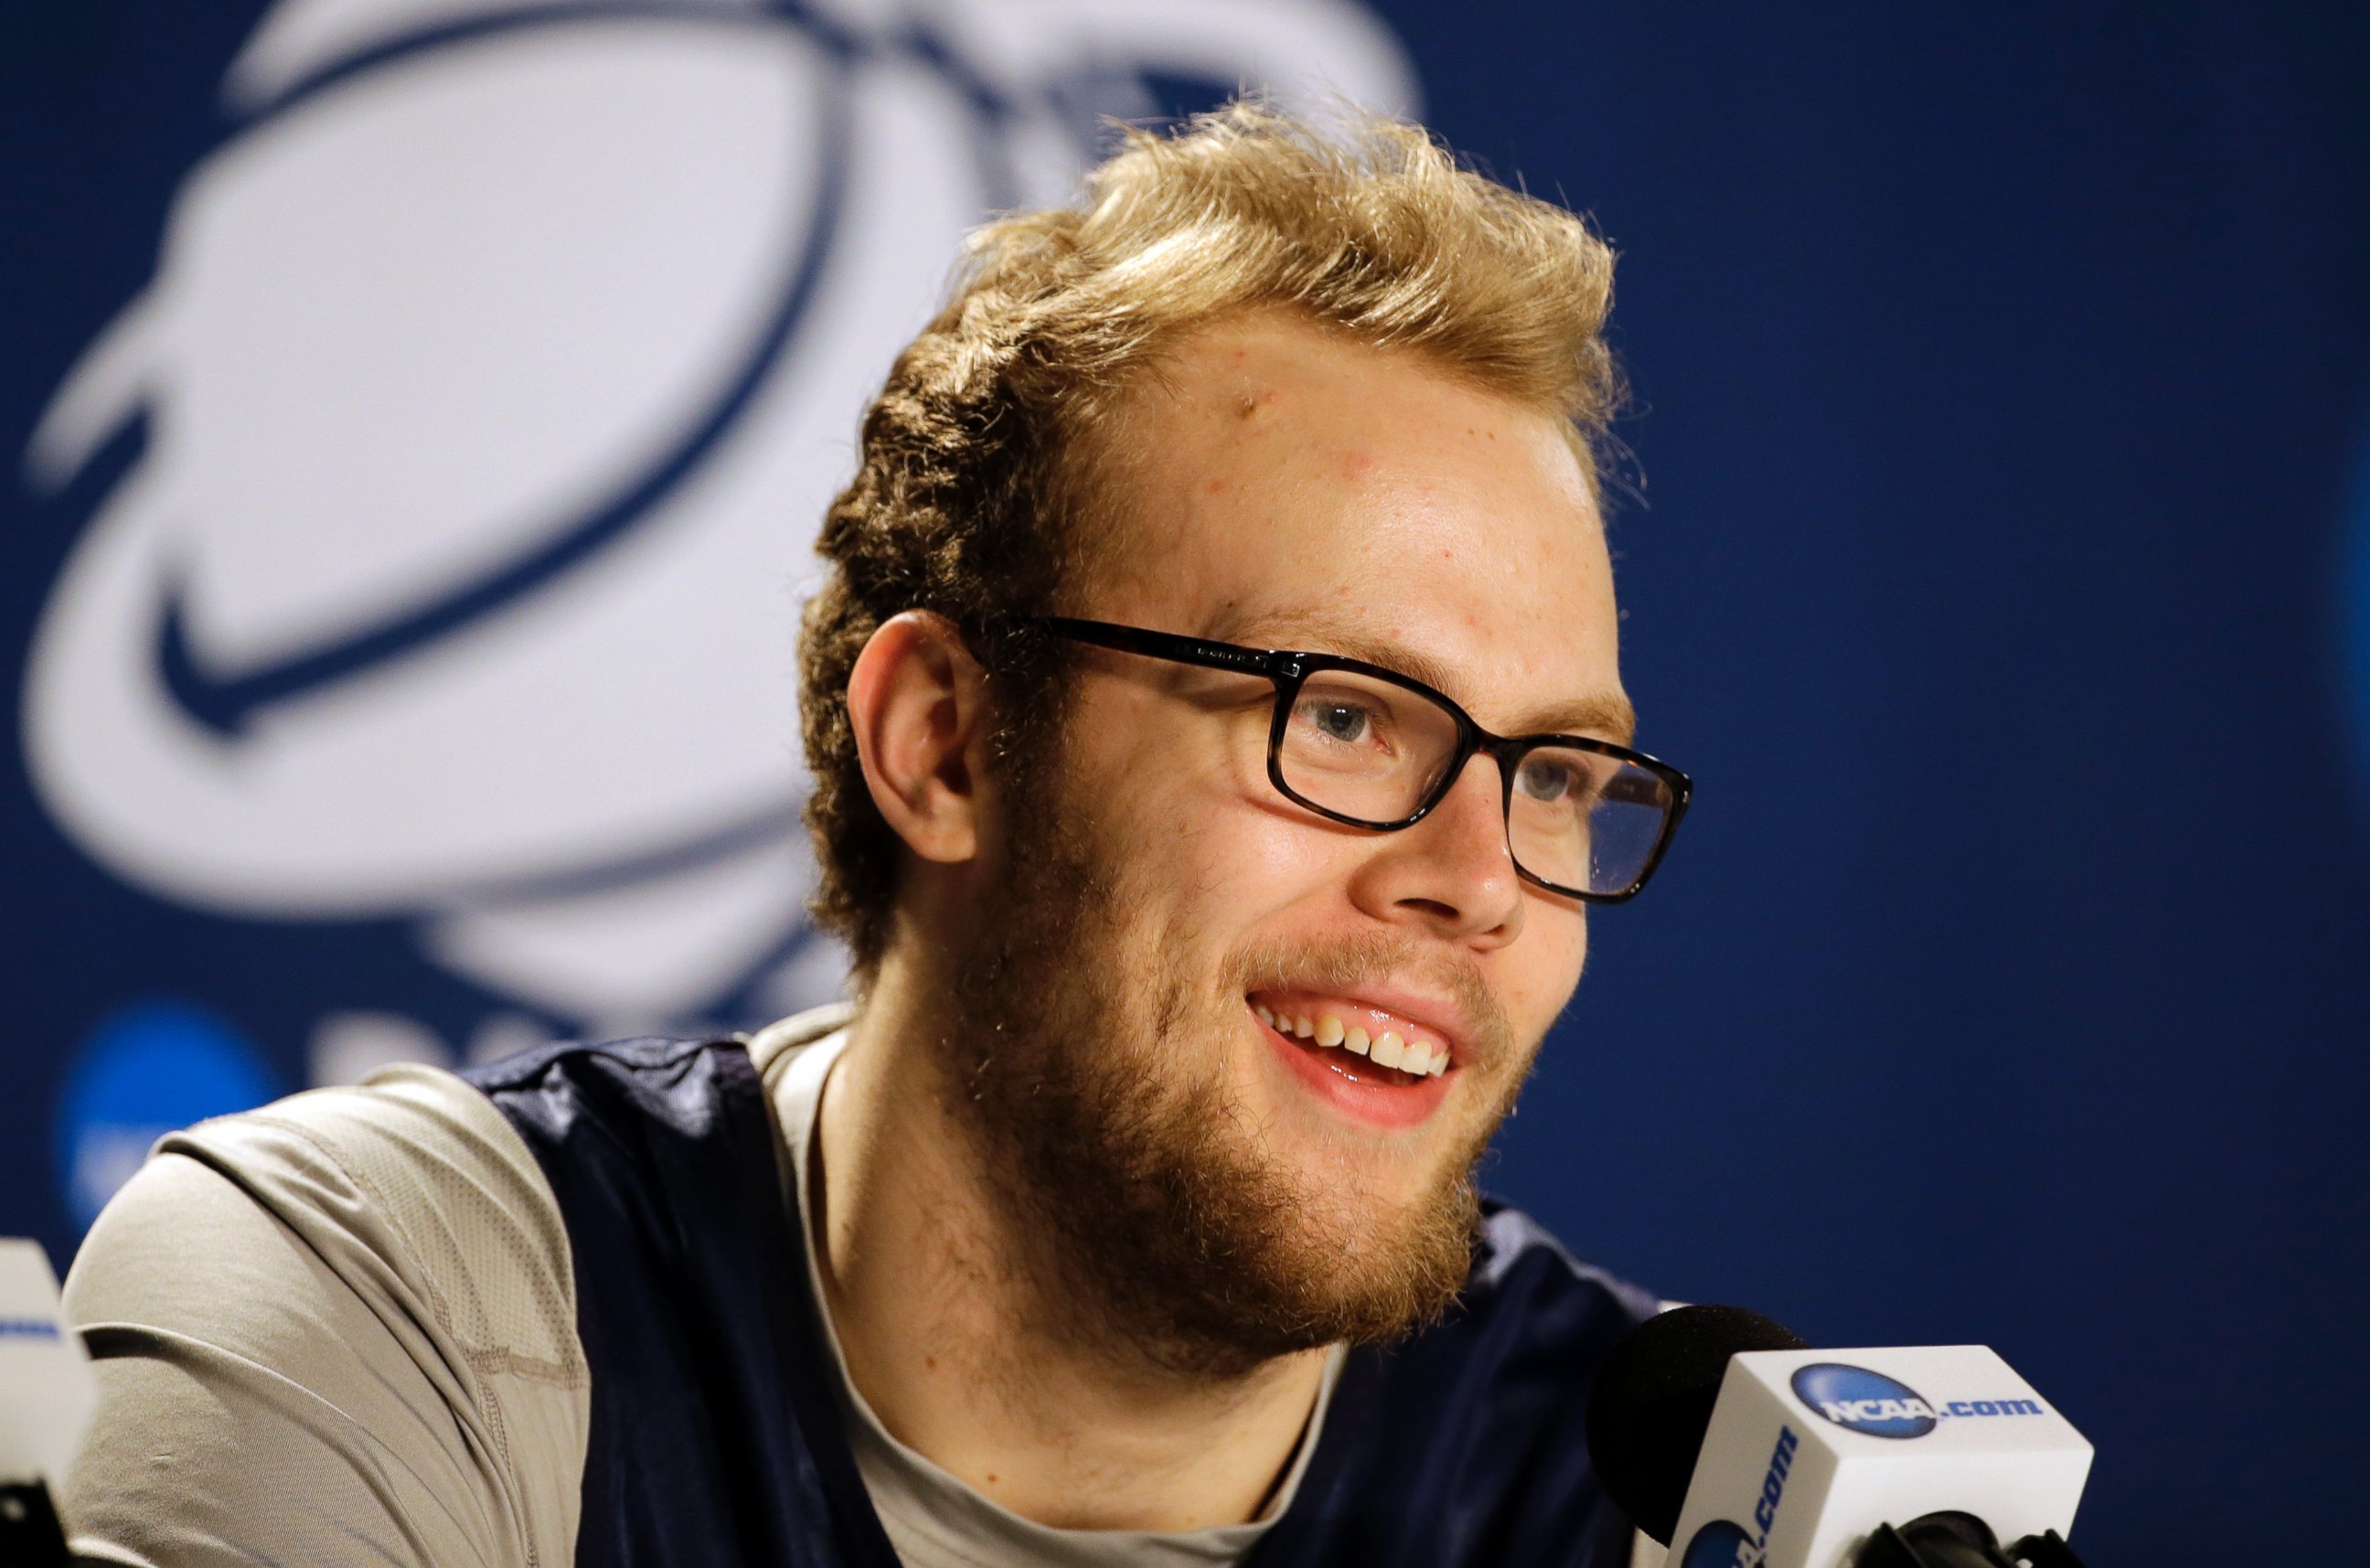 PHOTO: Xavier's Matt Stainbrook smiles during a news conference at the NCAA college basketball tournament, March 20, 2015, in Jacksonville, Fla.